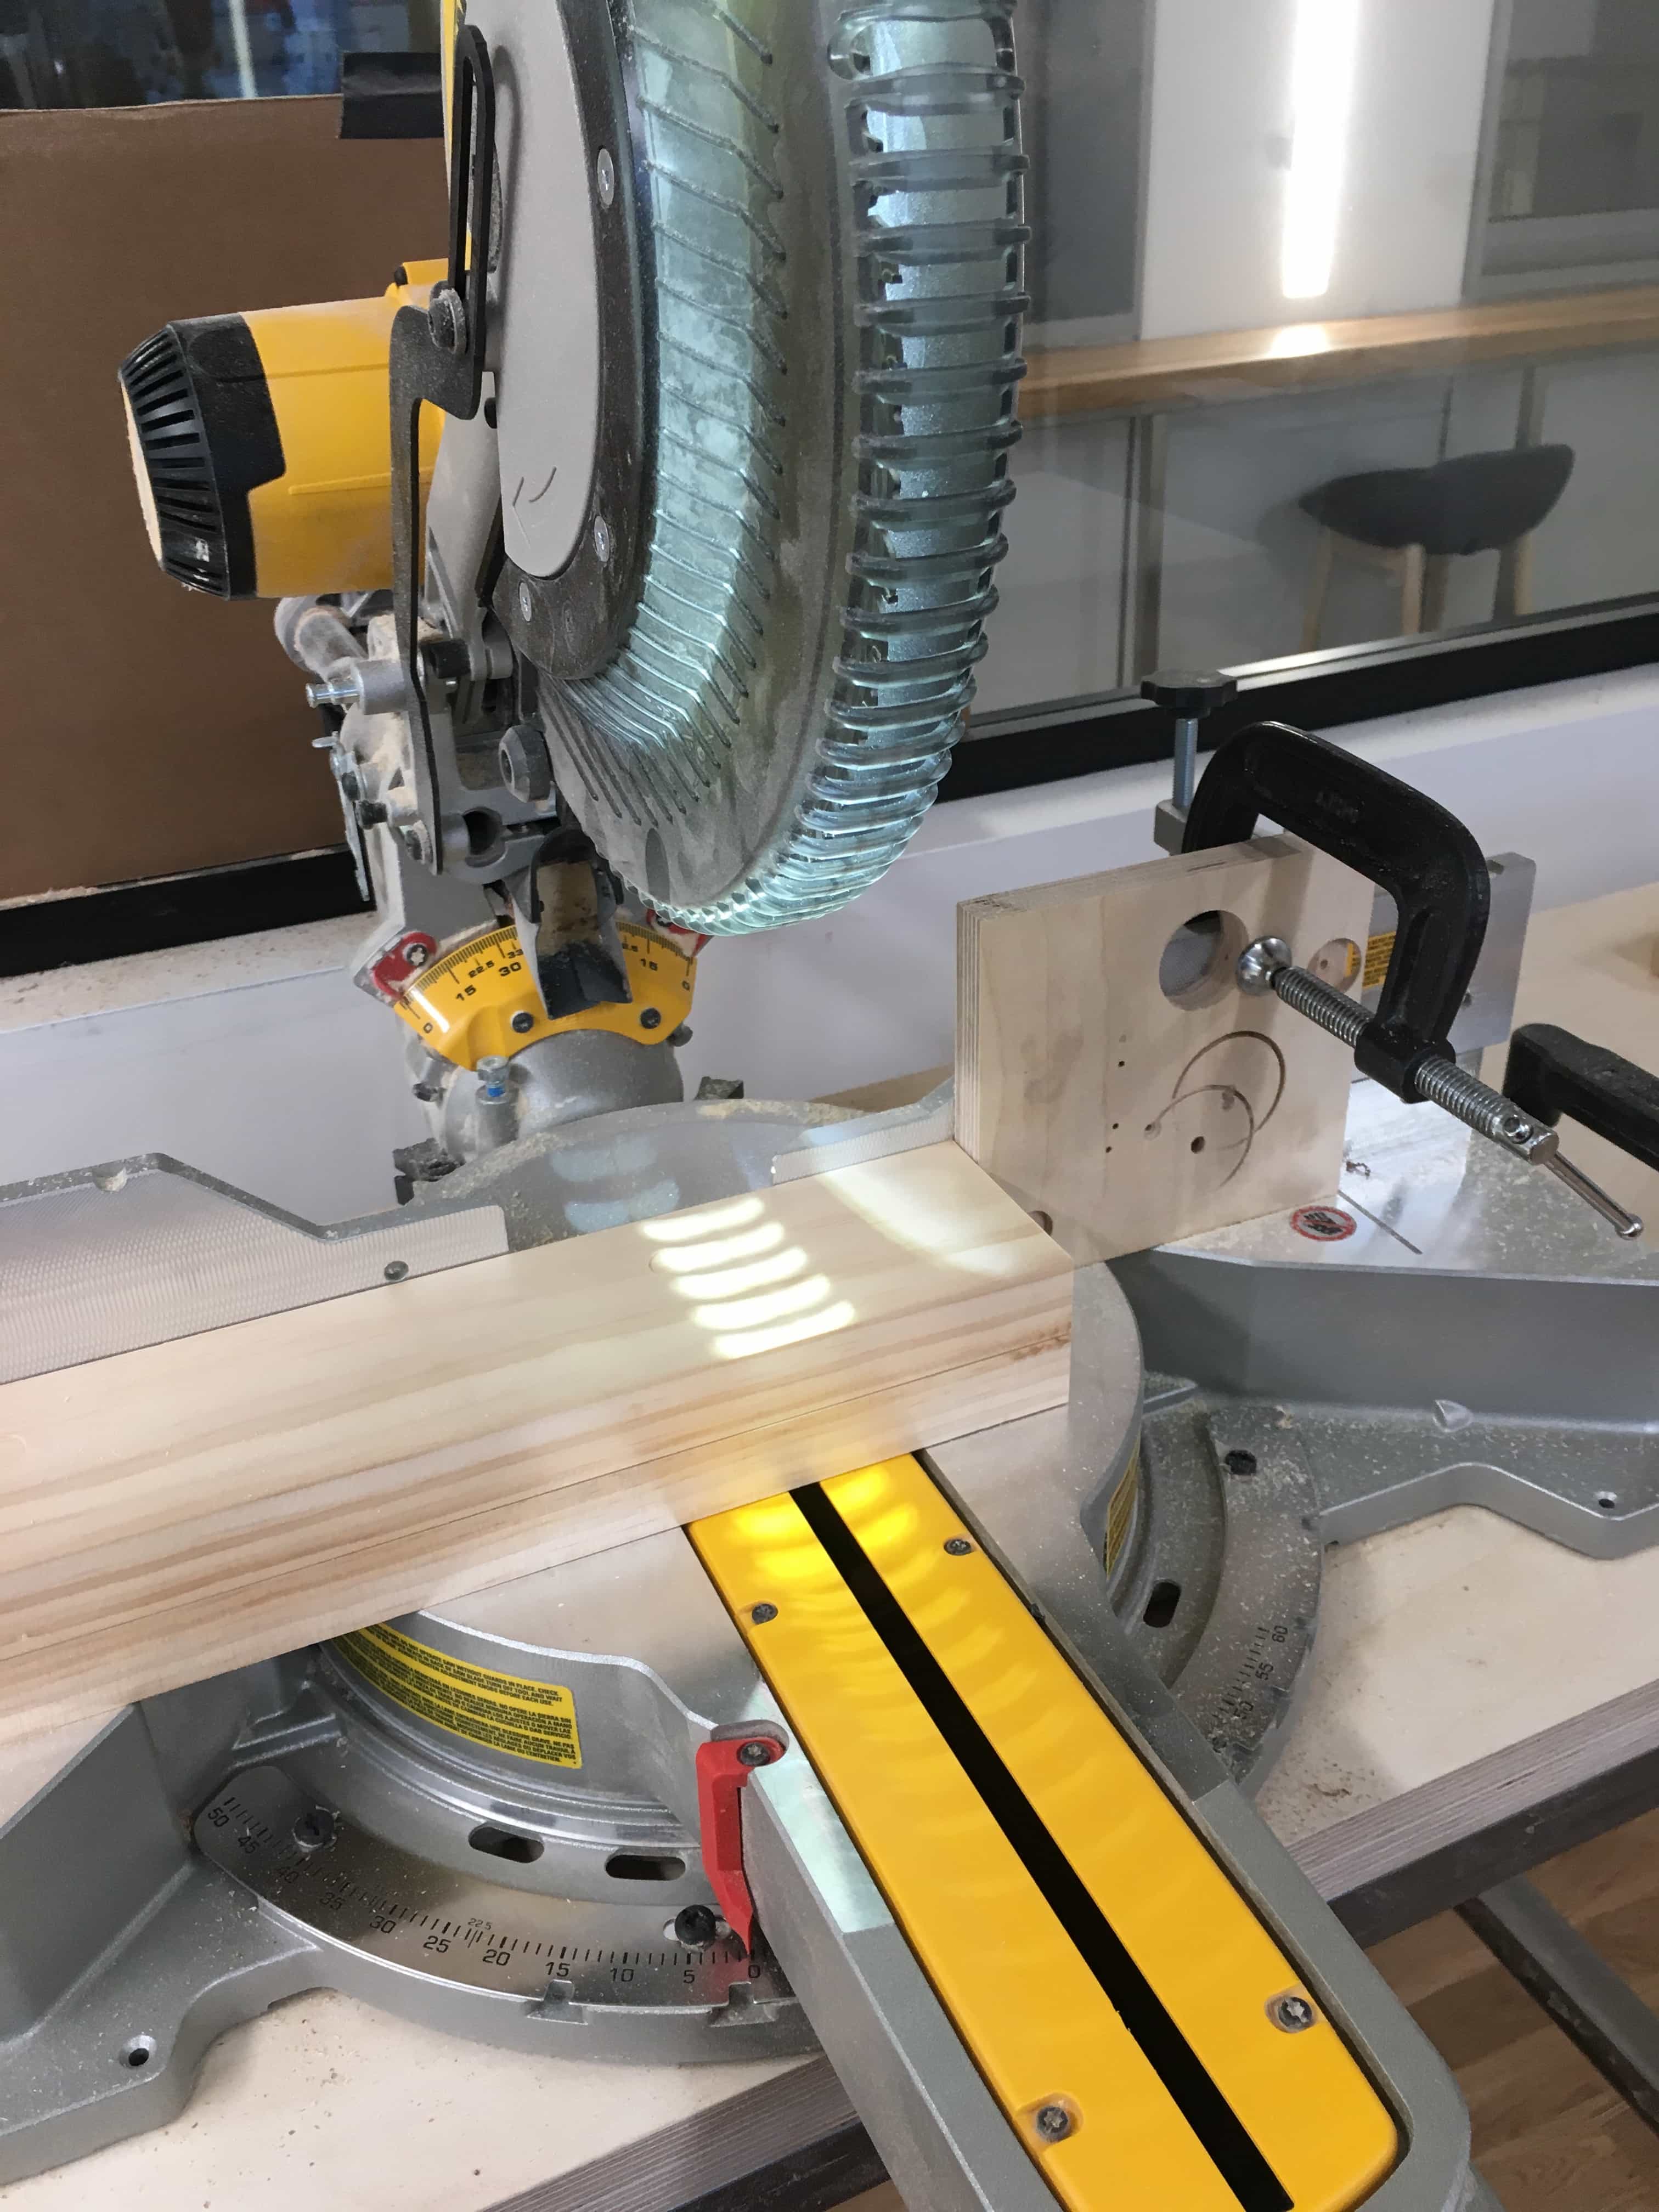 Miter saw with wood ready to cut.